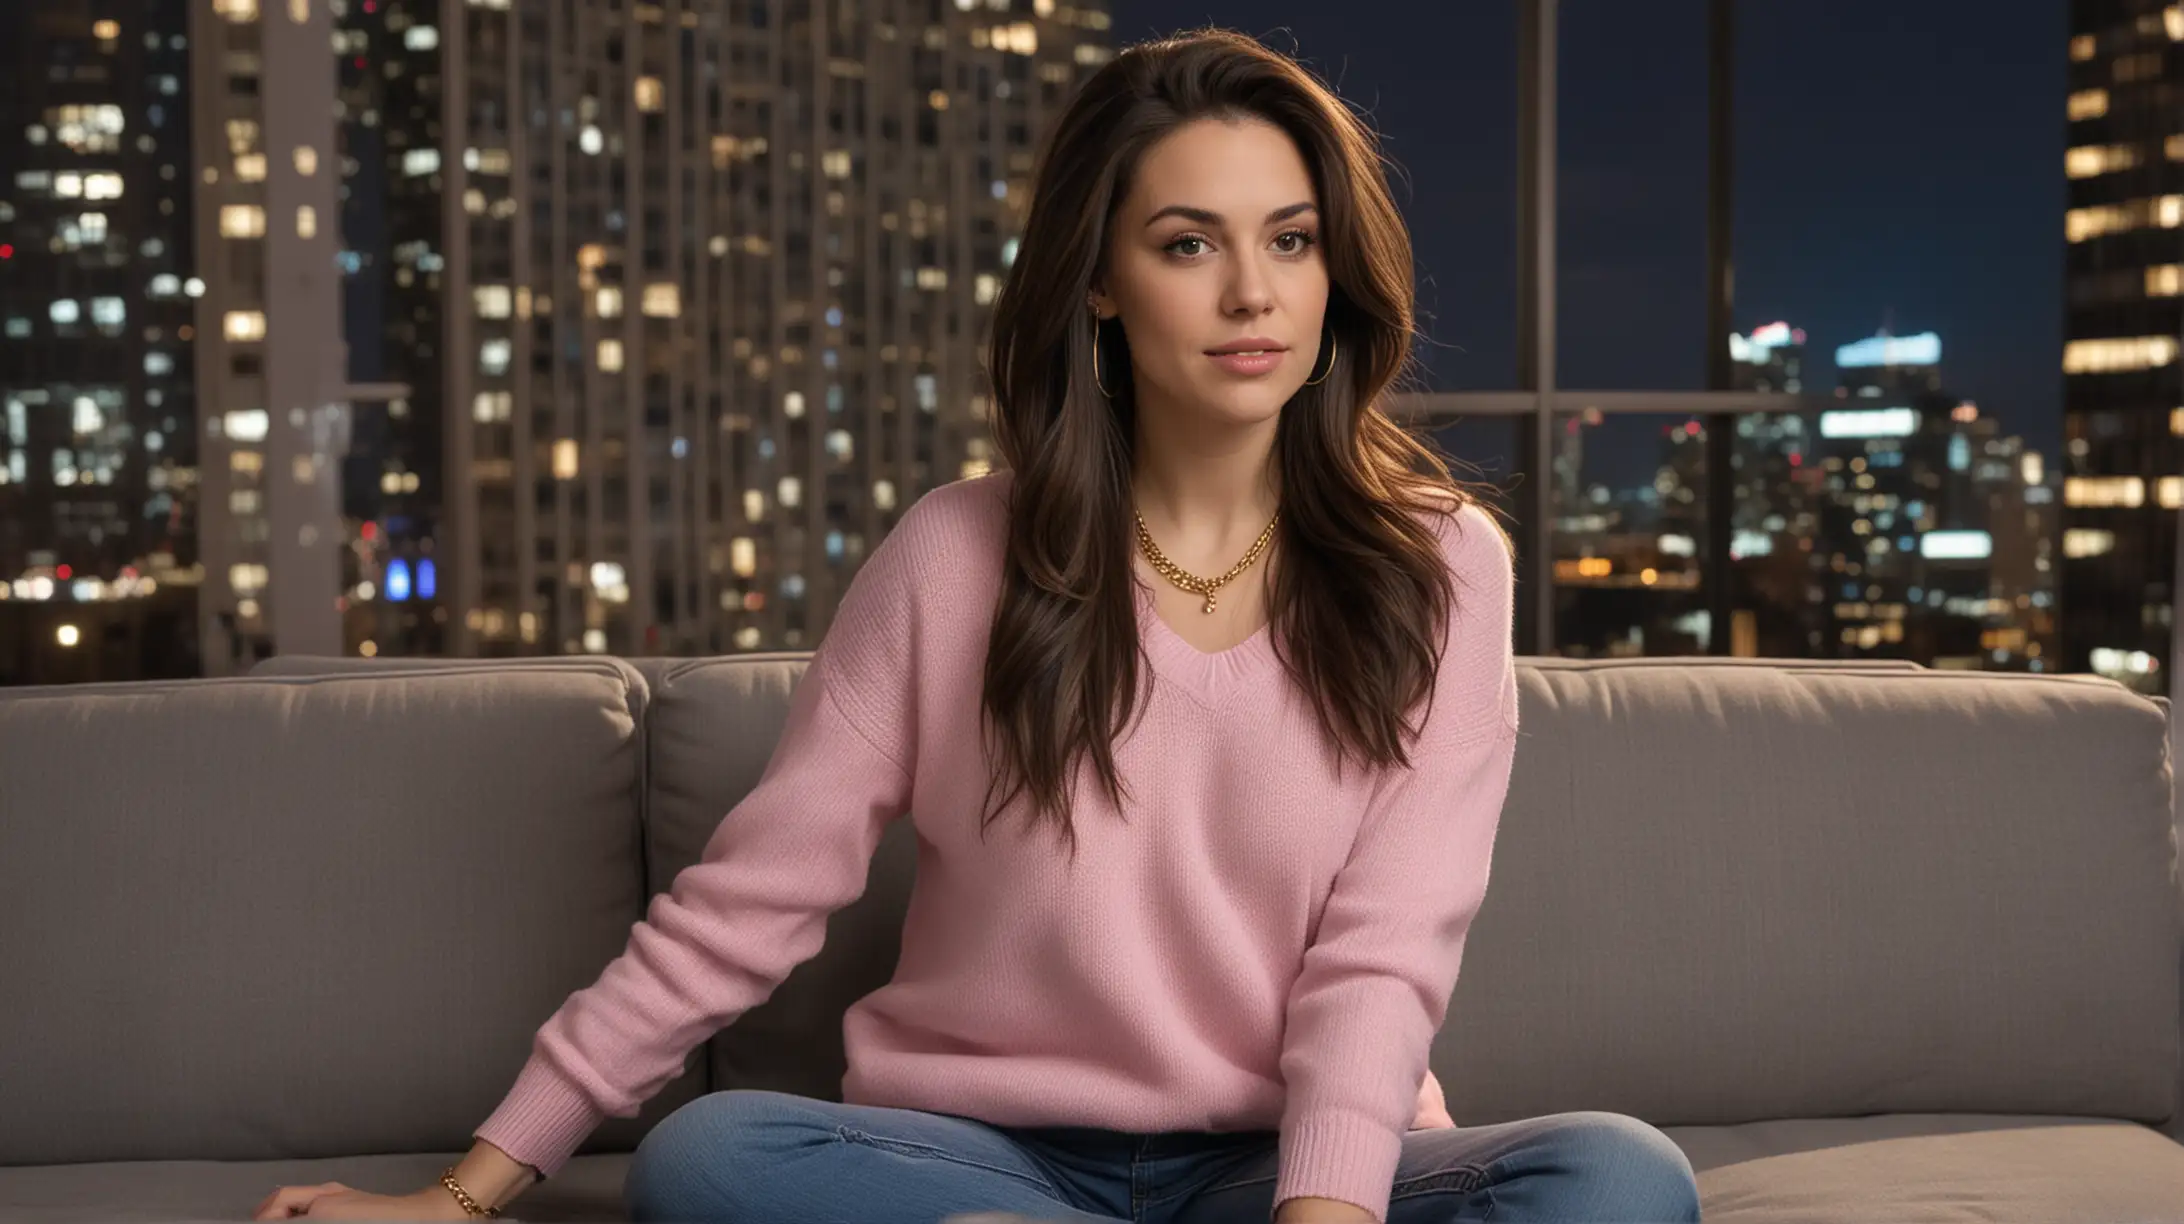 On the left is 30 year old white woman with long dark brown hair blowout style, wearing a pink sweater, gold necklace, blue jeans. She is sitting on a gray couch, urban high rise background at night.